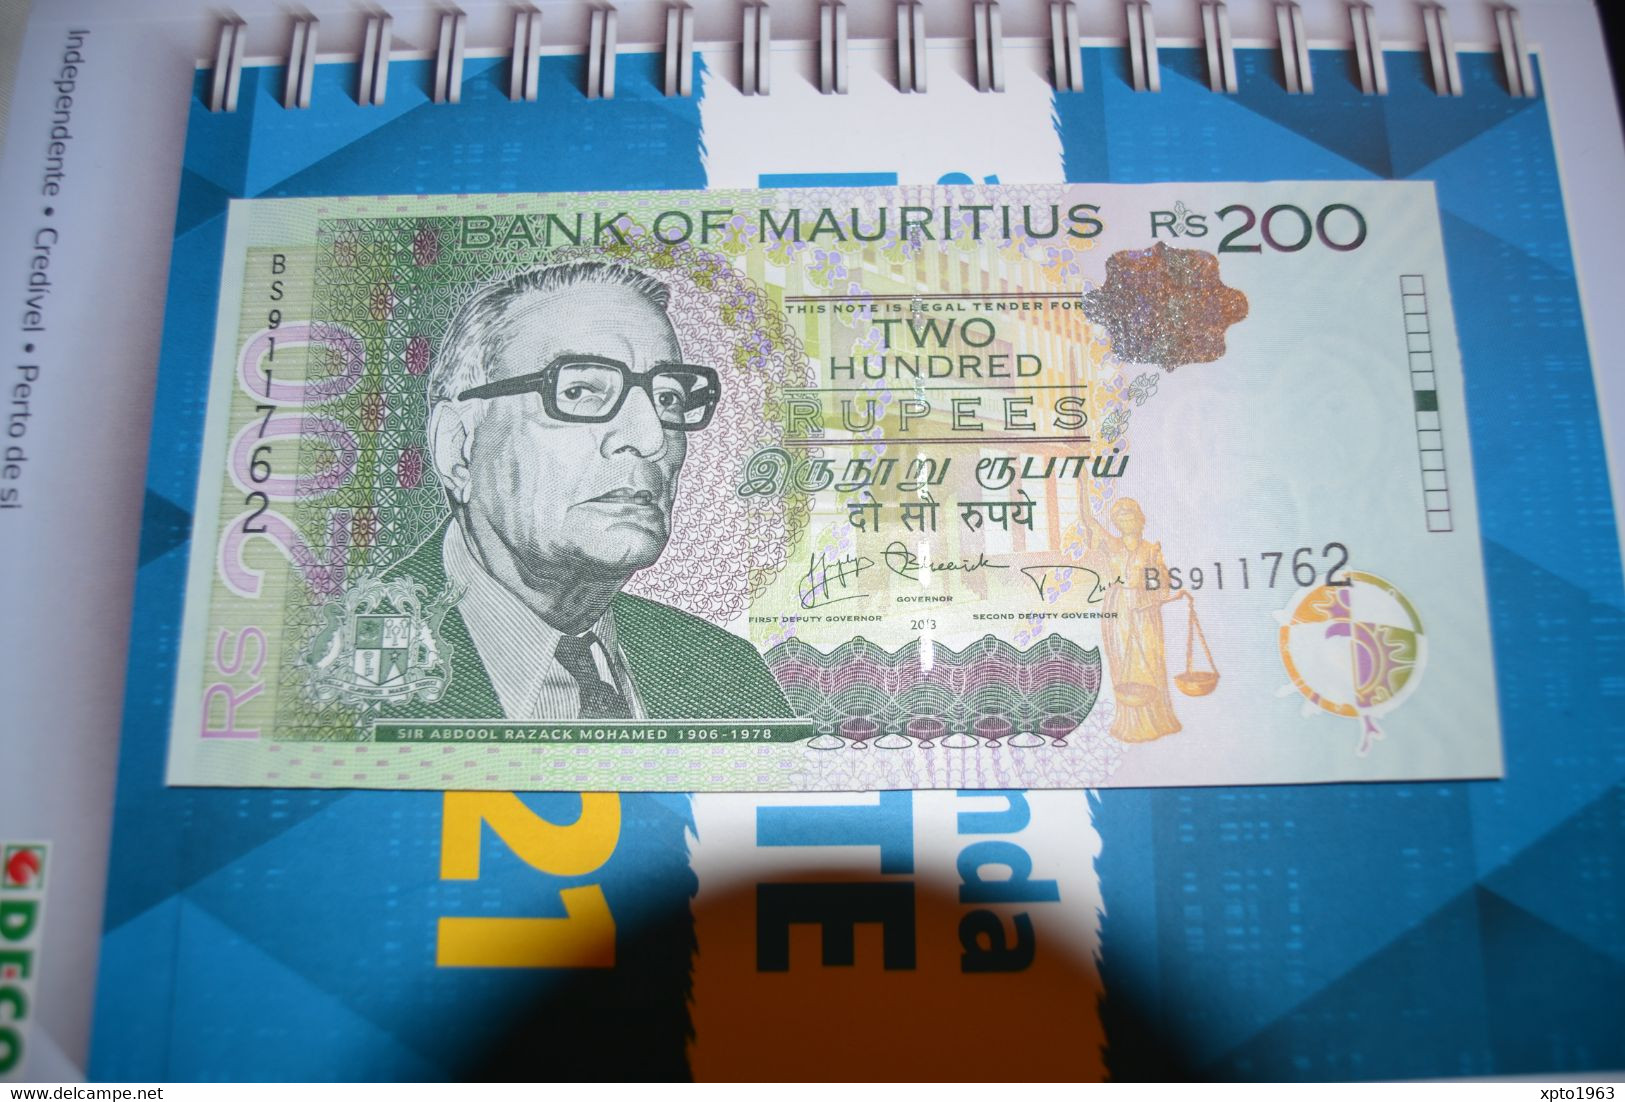 MAURITIUS - 200 RUPEES 2013 - P-61- Serial Number: BS911762 - UNC -  NEUF - Maurice